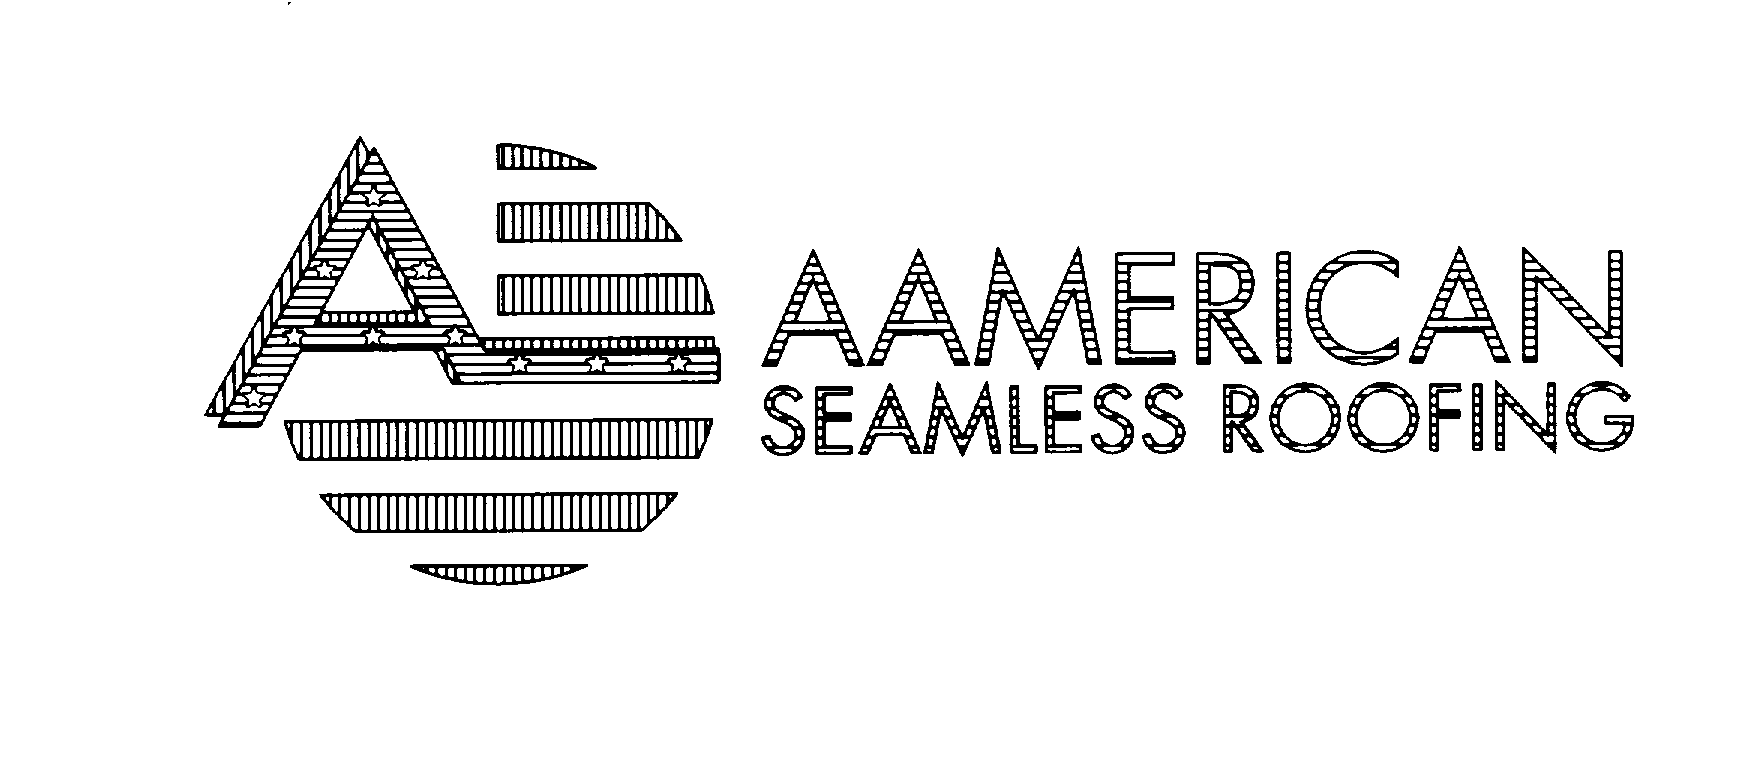  AAMERICAN SEAMLESS ROOFING